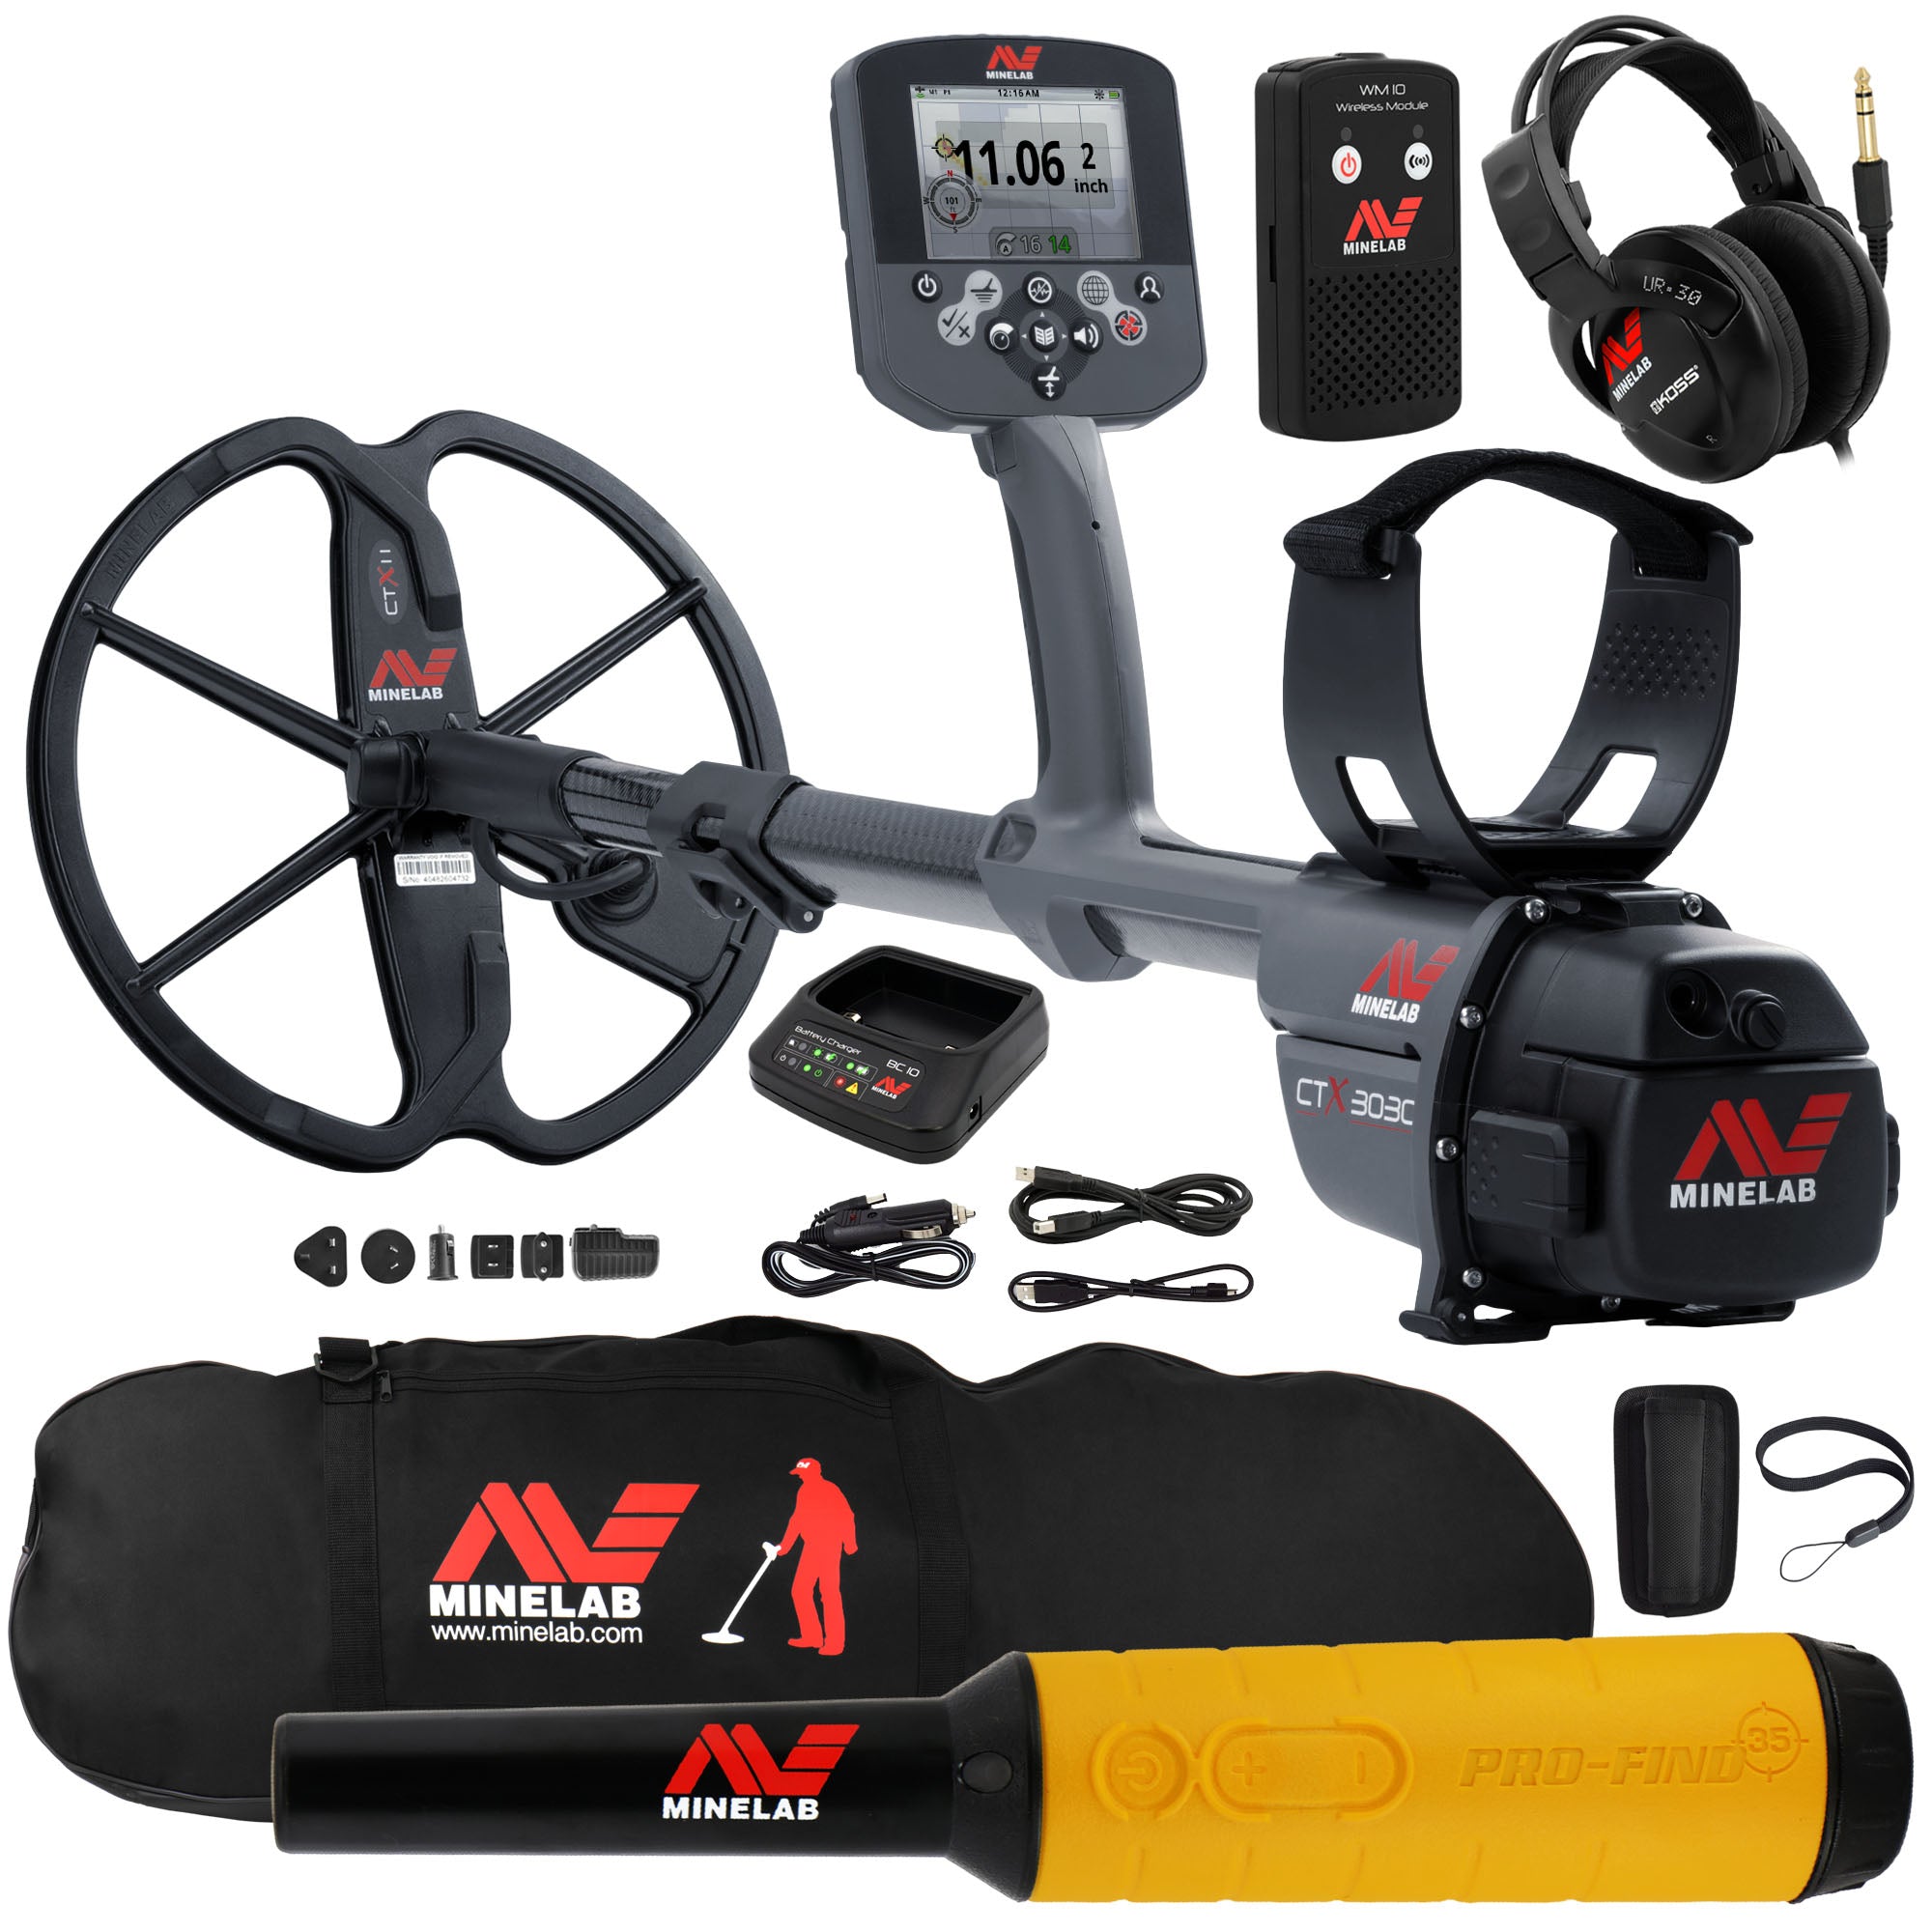 Minelab CTX 3030 Metal Detector with Carrybag and Gloves